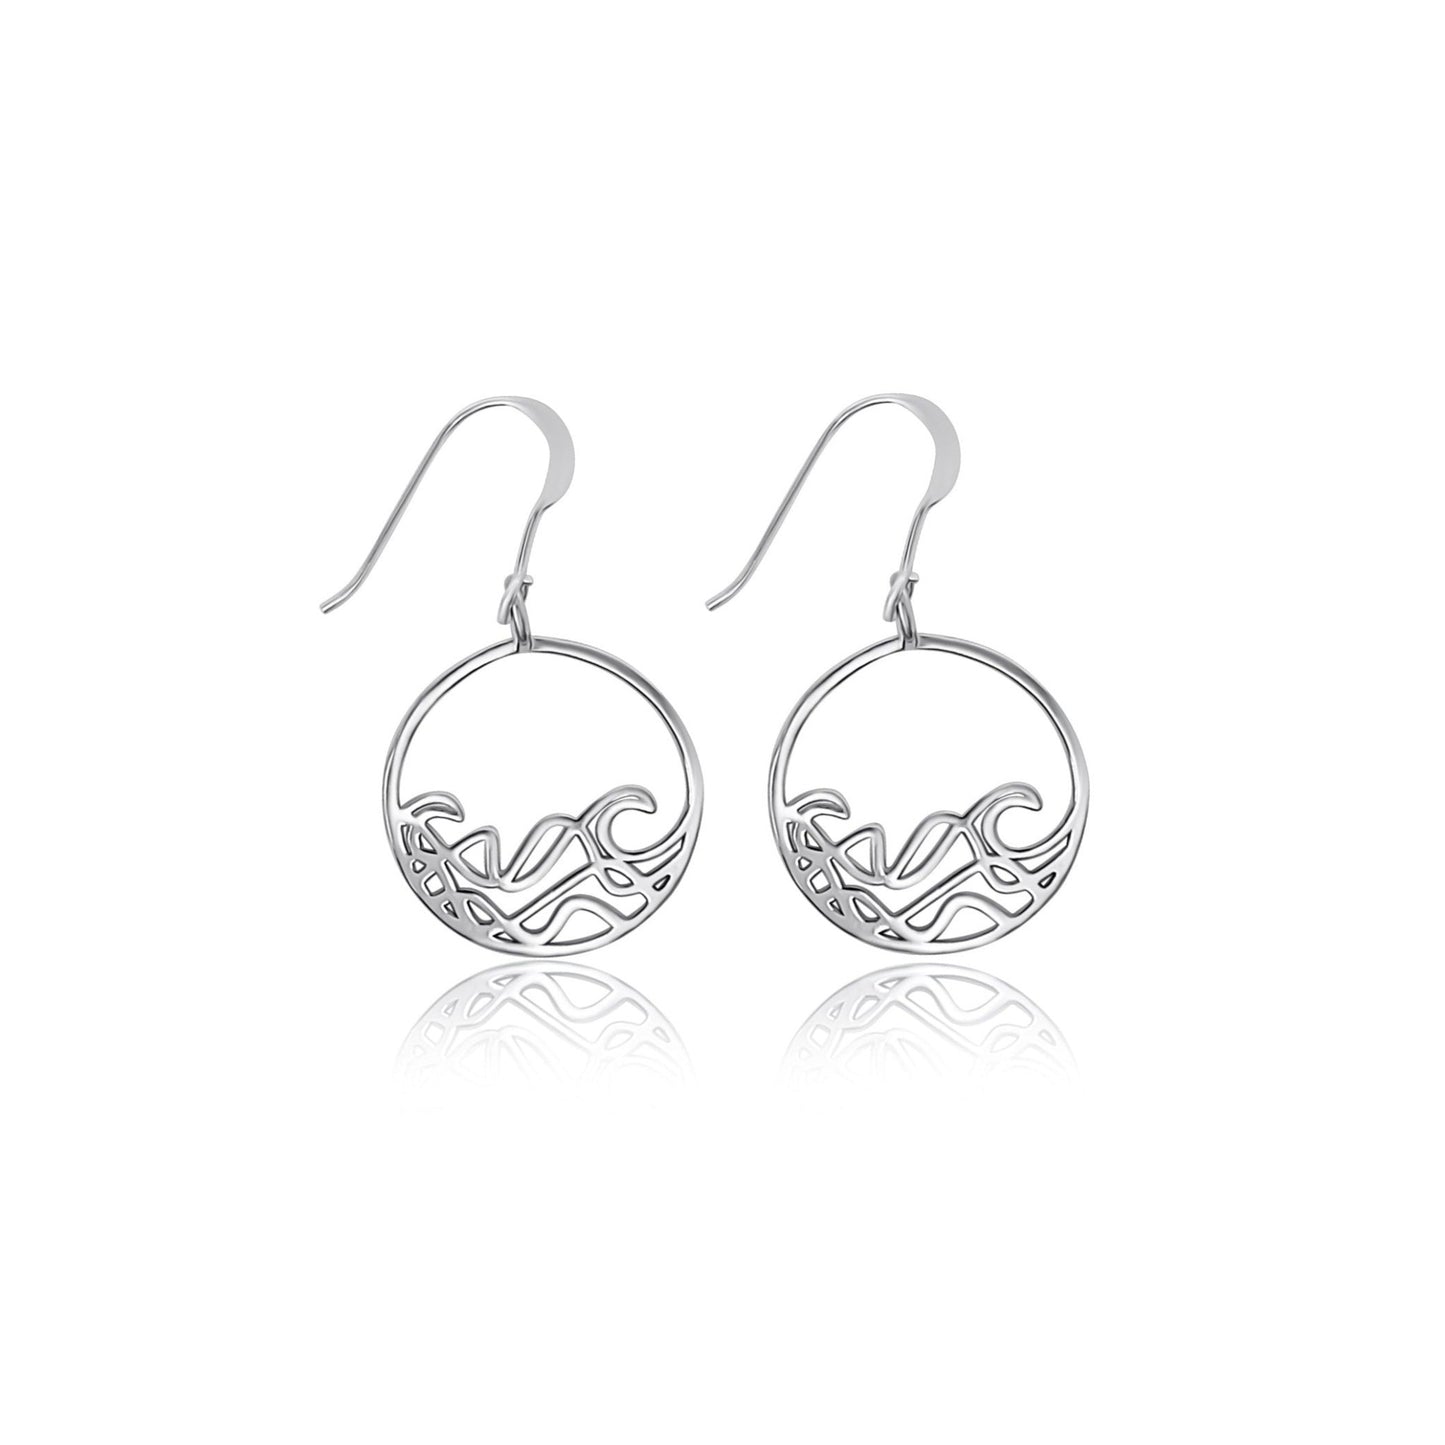 sterling silver ocean surf wave circle earrings dangle on French ear wires